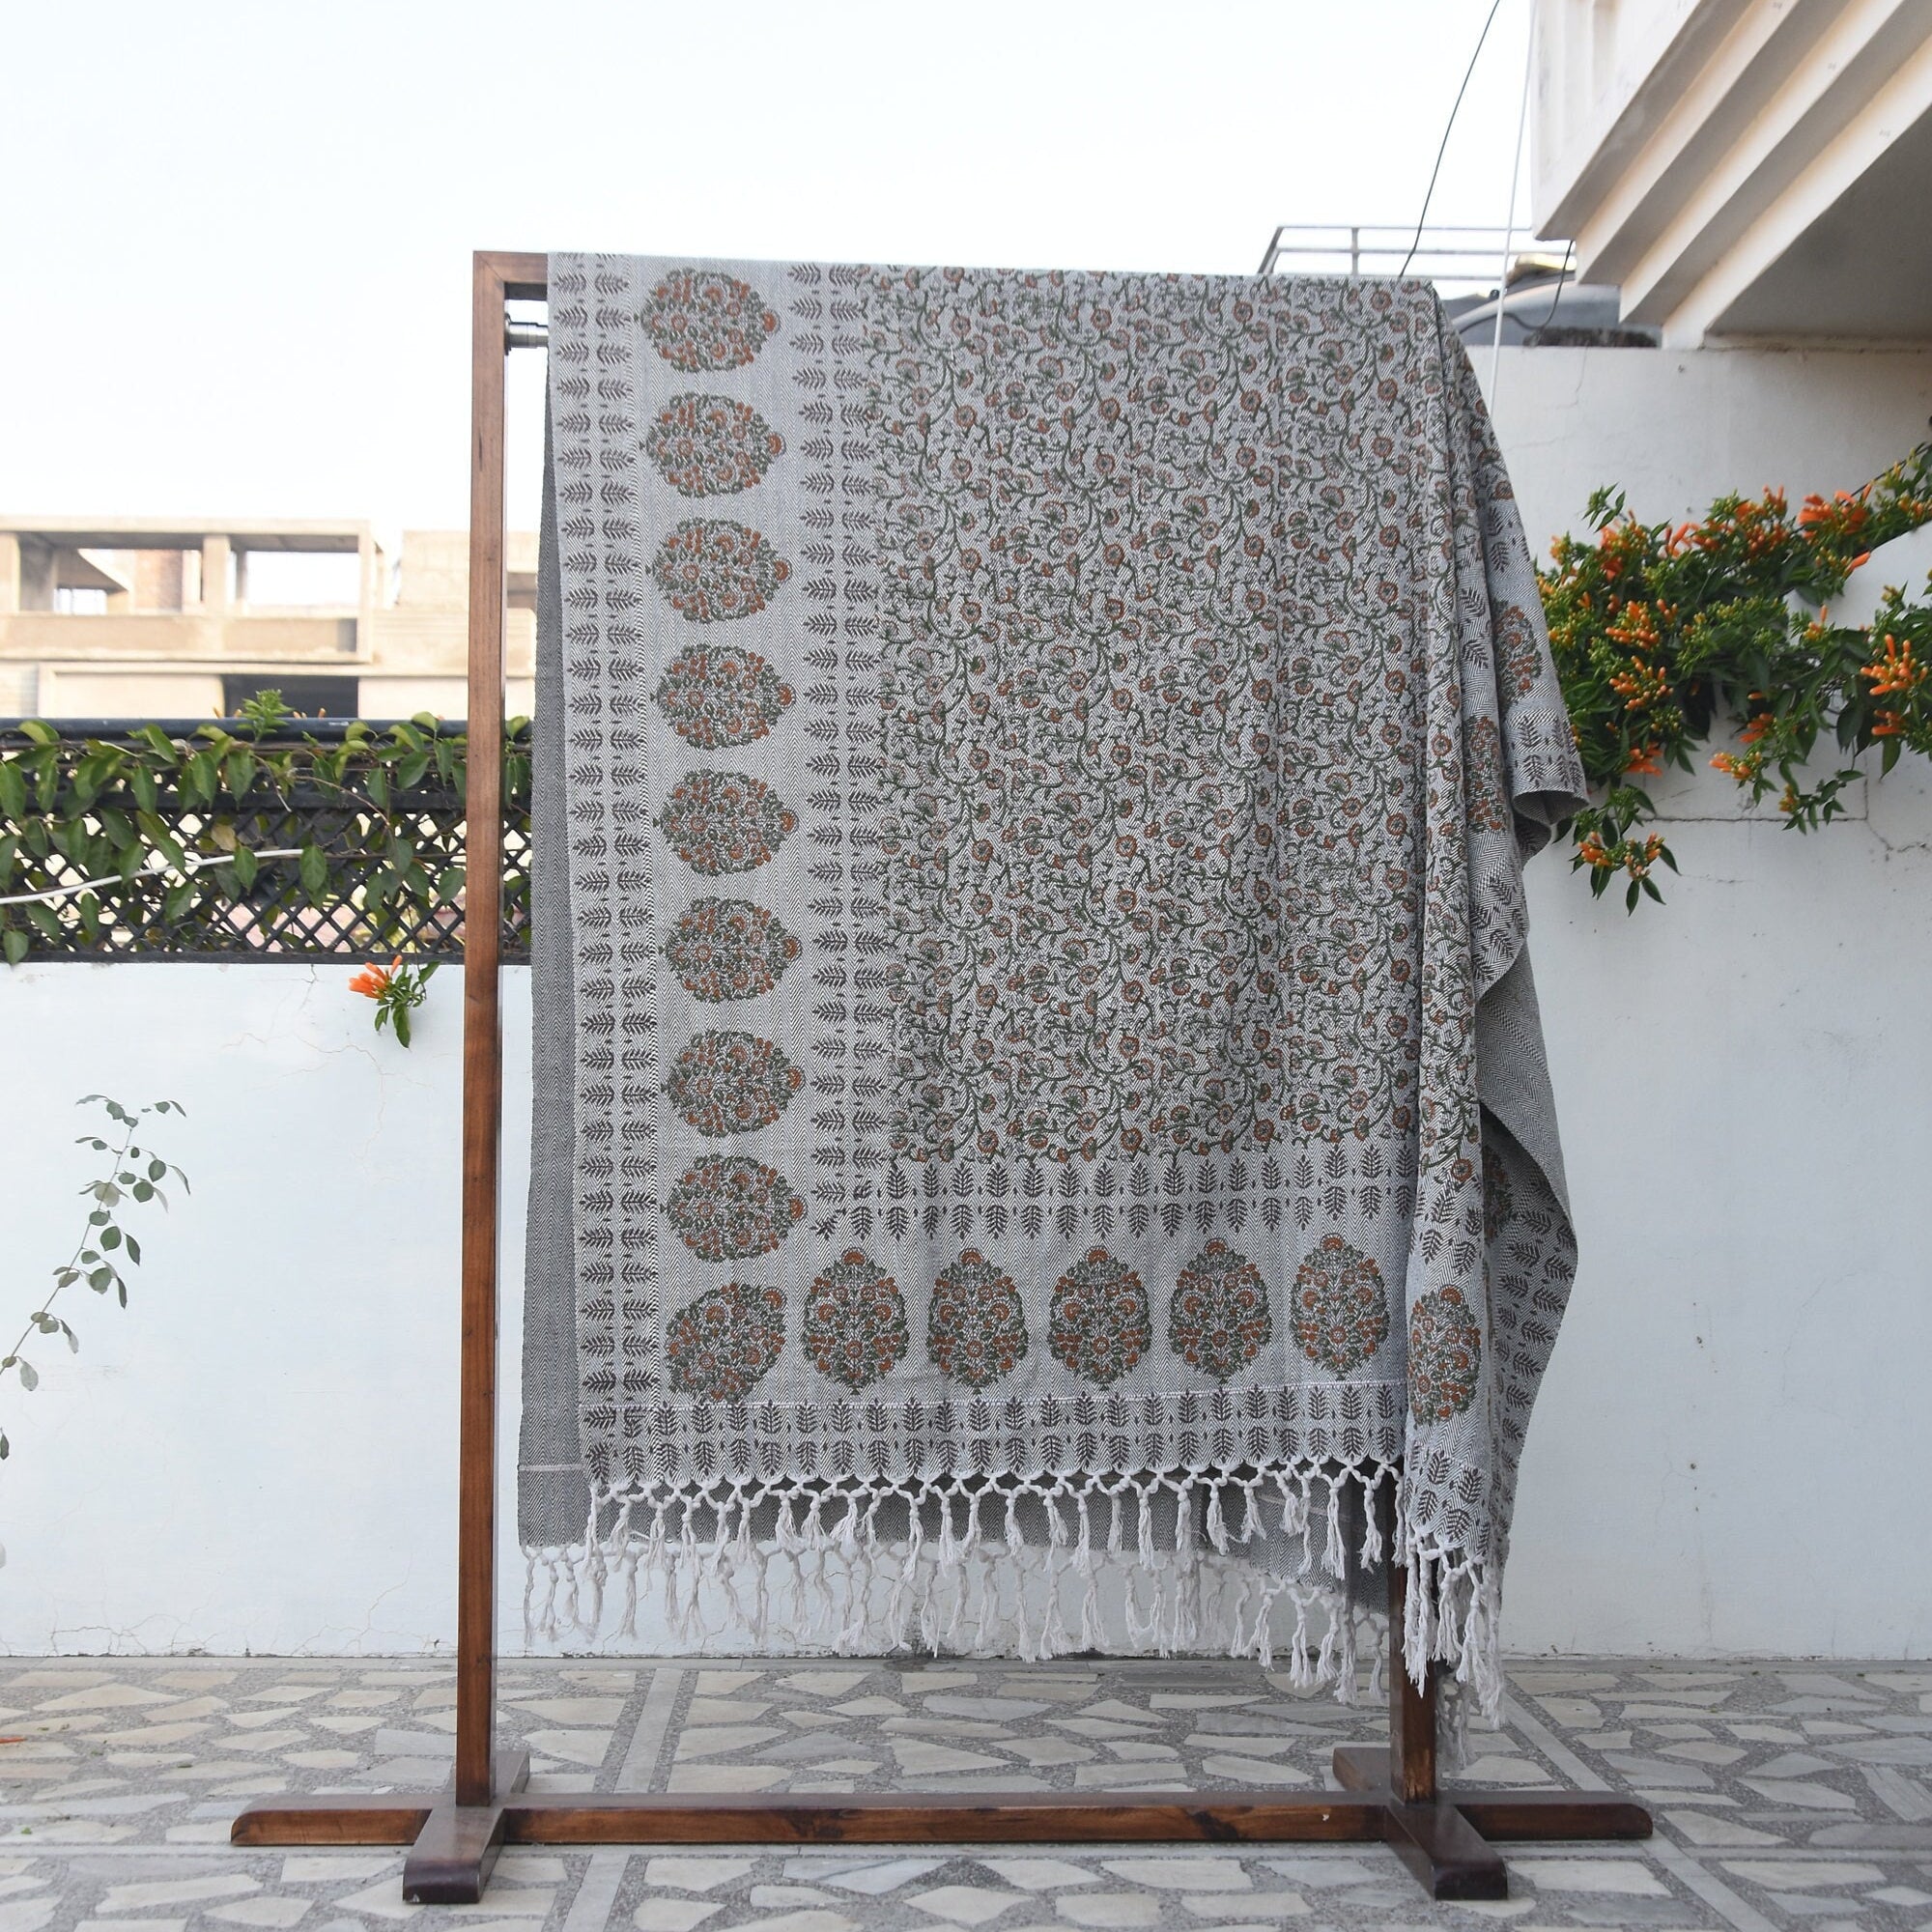 Blankets and Throws - Handwoven Block Print Throws - Handmade Blankets - Handwoven Handloom Fabric - HIMACHAL